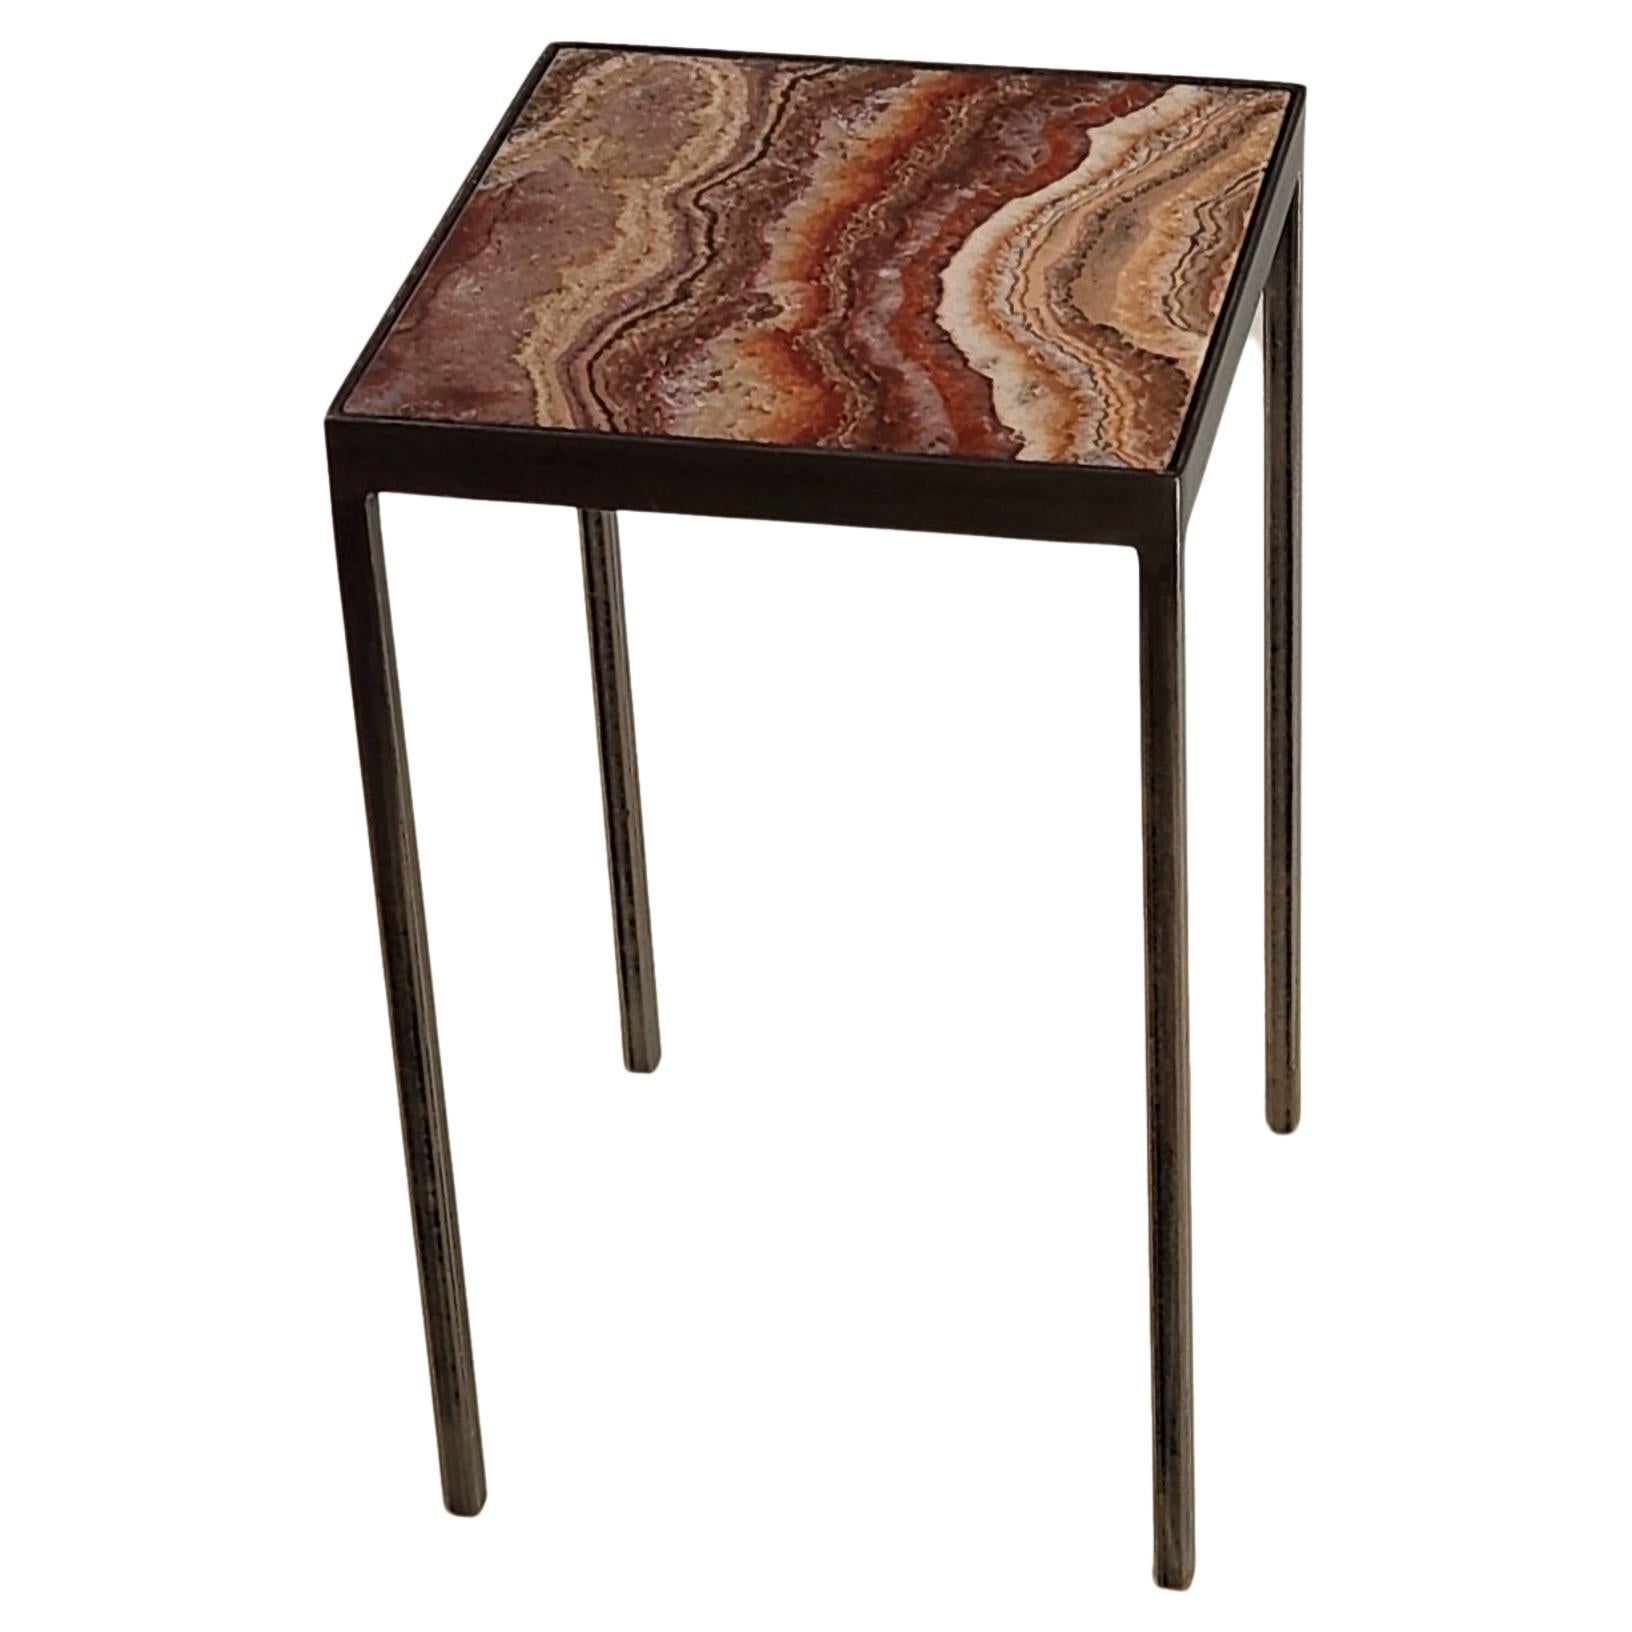 Elegant Side Table with an Onyx Tile by Gueridon Designs